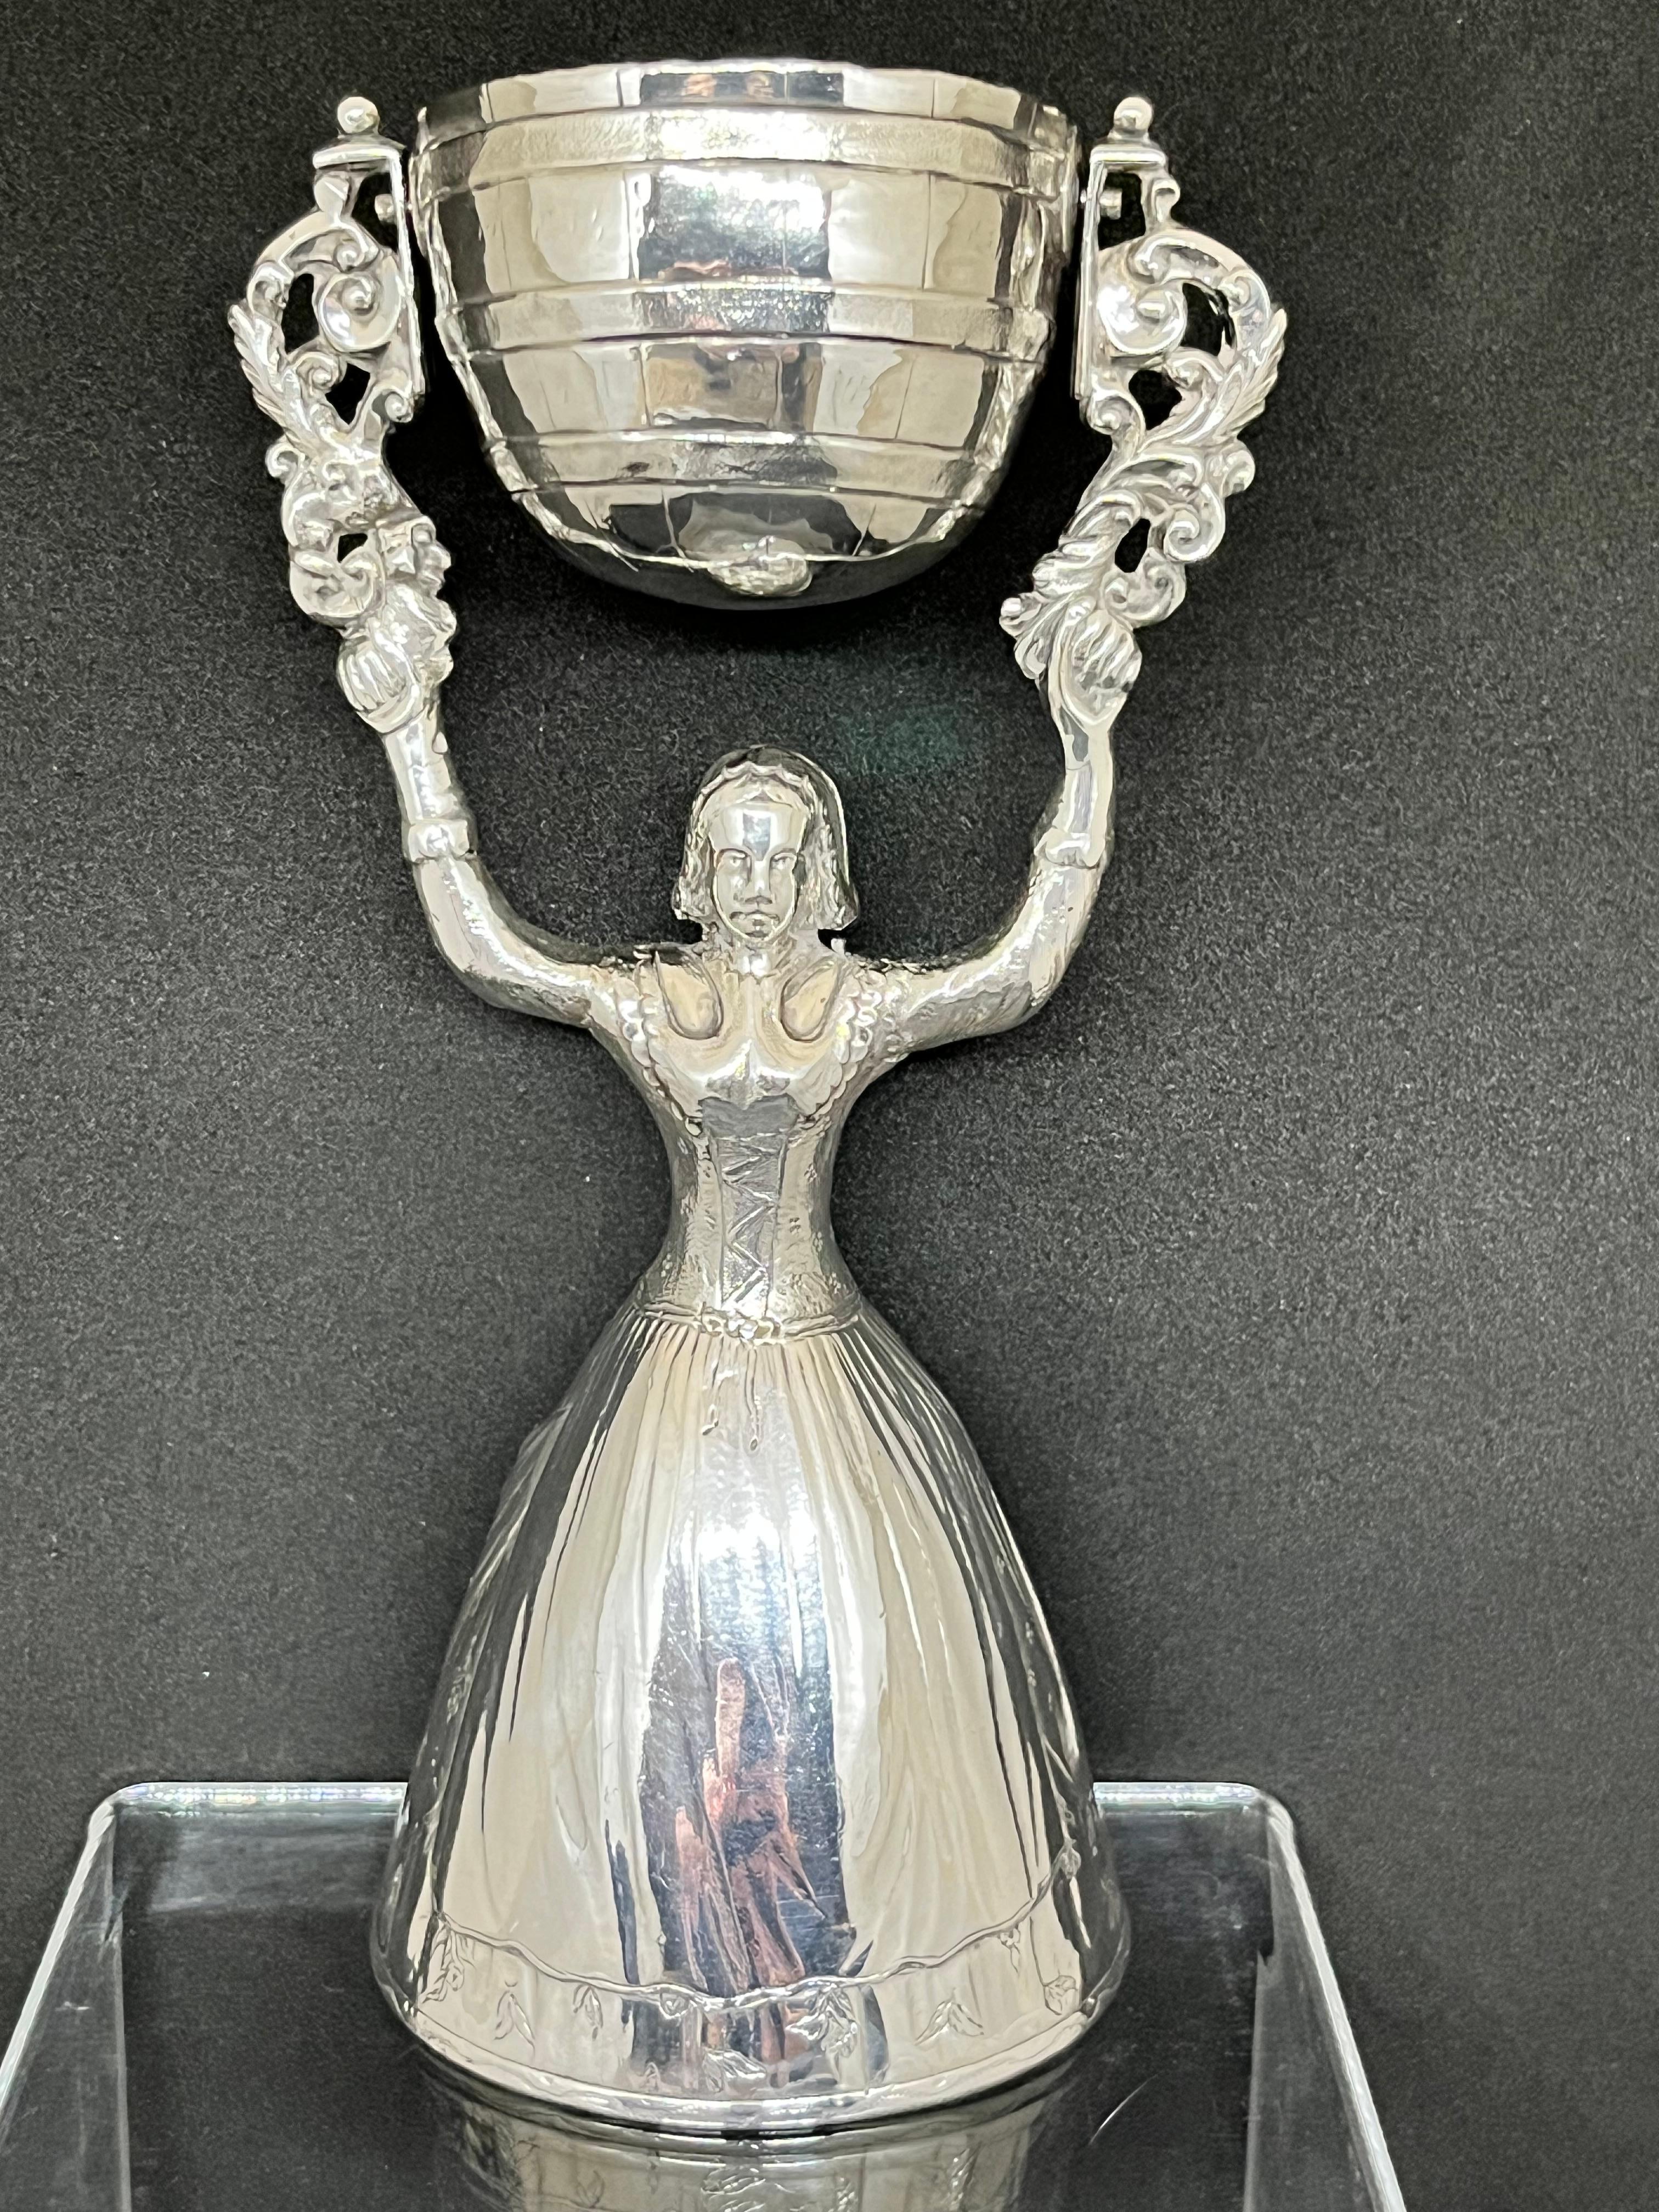 An extremely rare and sought-after 18th-century George III sterling silver hallmarked marriage cup or wager cup, formed as a figure of a woman with flared skirt, holding aloft a pivoted bowl.

This vessel is believed to serve two purposes, both of